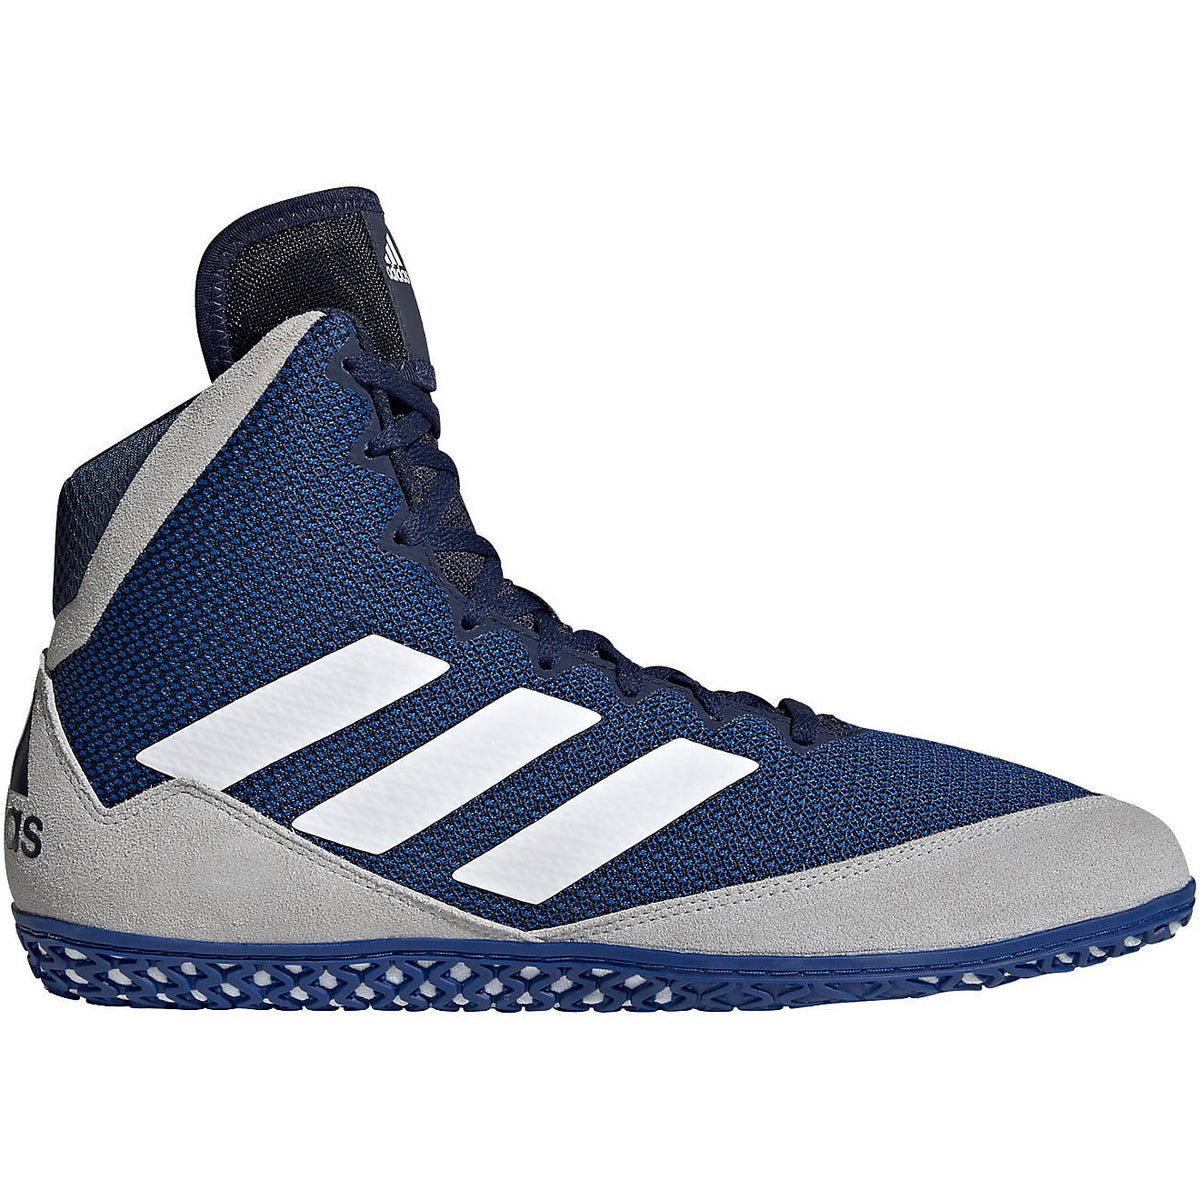 ADIDAS MAT WIZARD 4 Wrestling Shoes Boots Mens 12 Red White Blue USA BC0533  $69.95 - PicClick